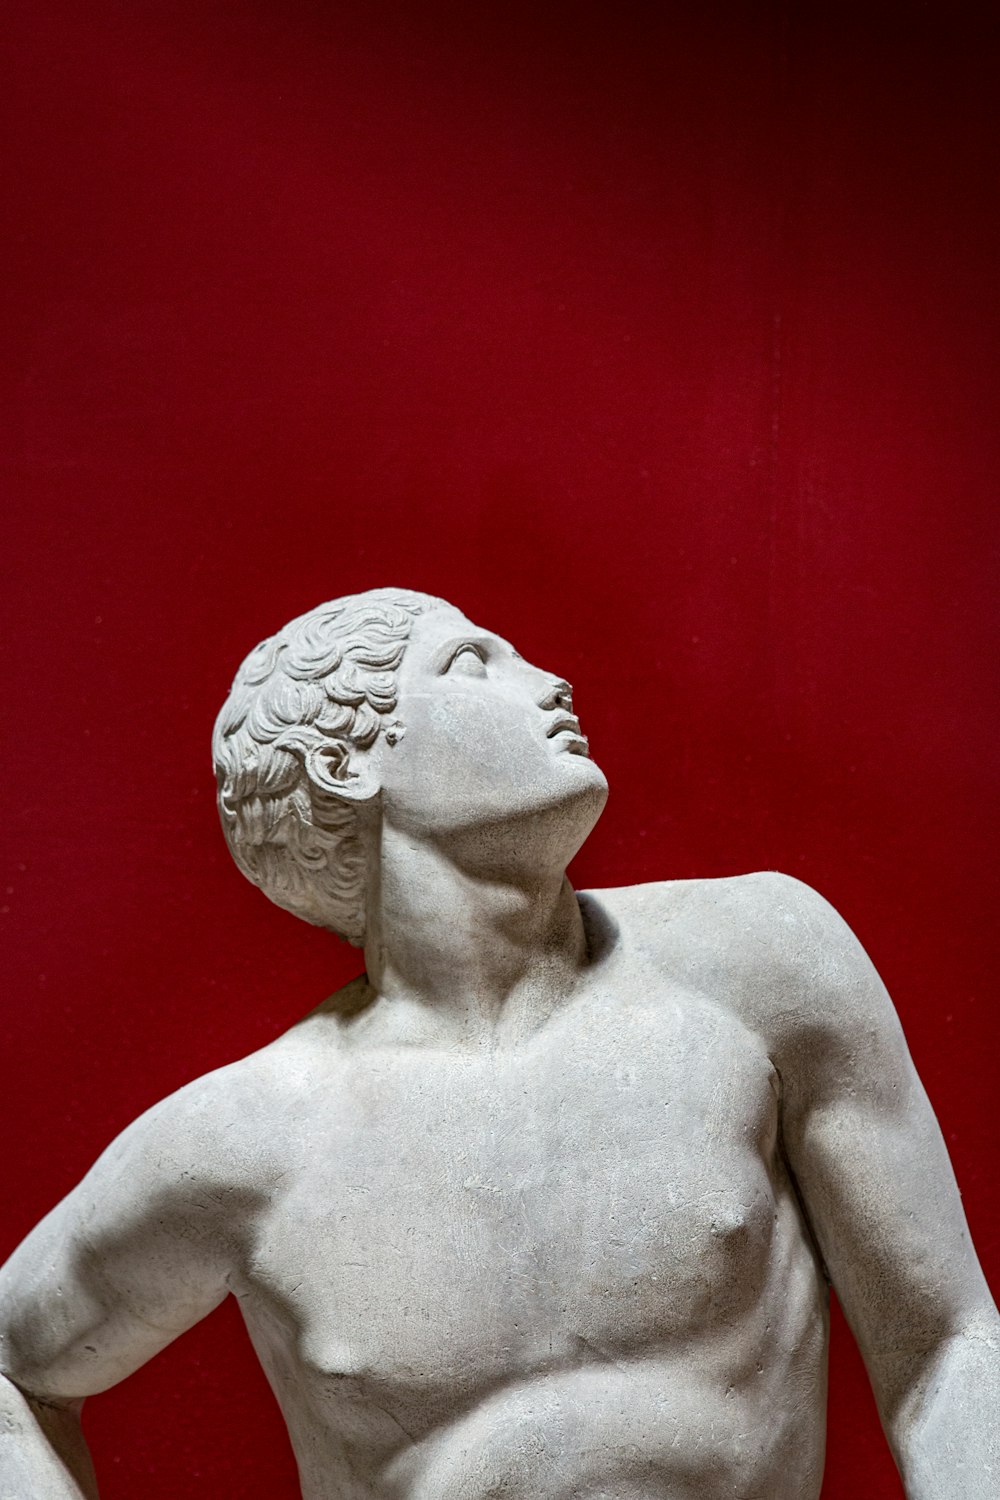 Grecian male statue looks up on red background